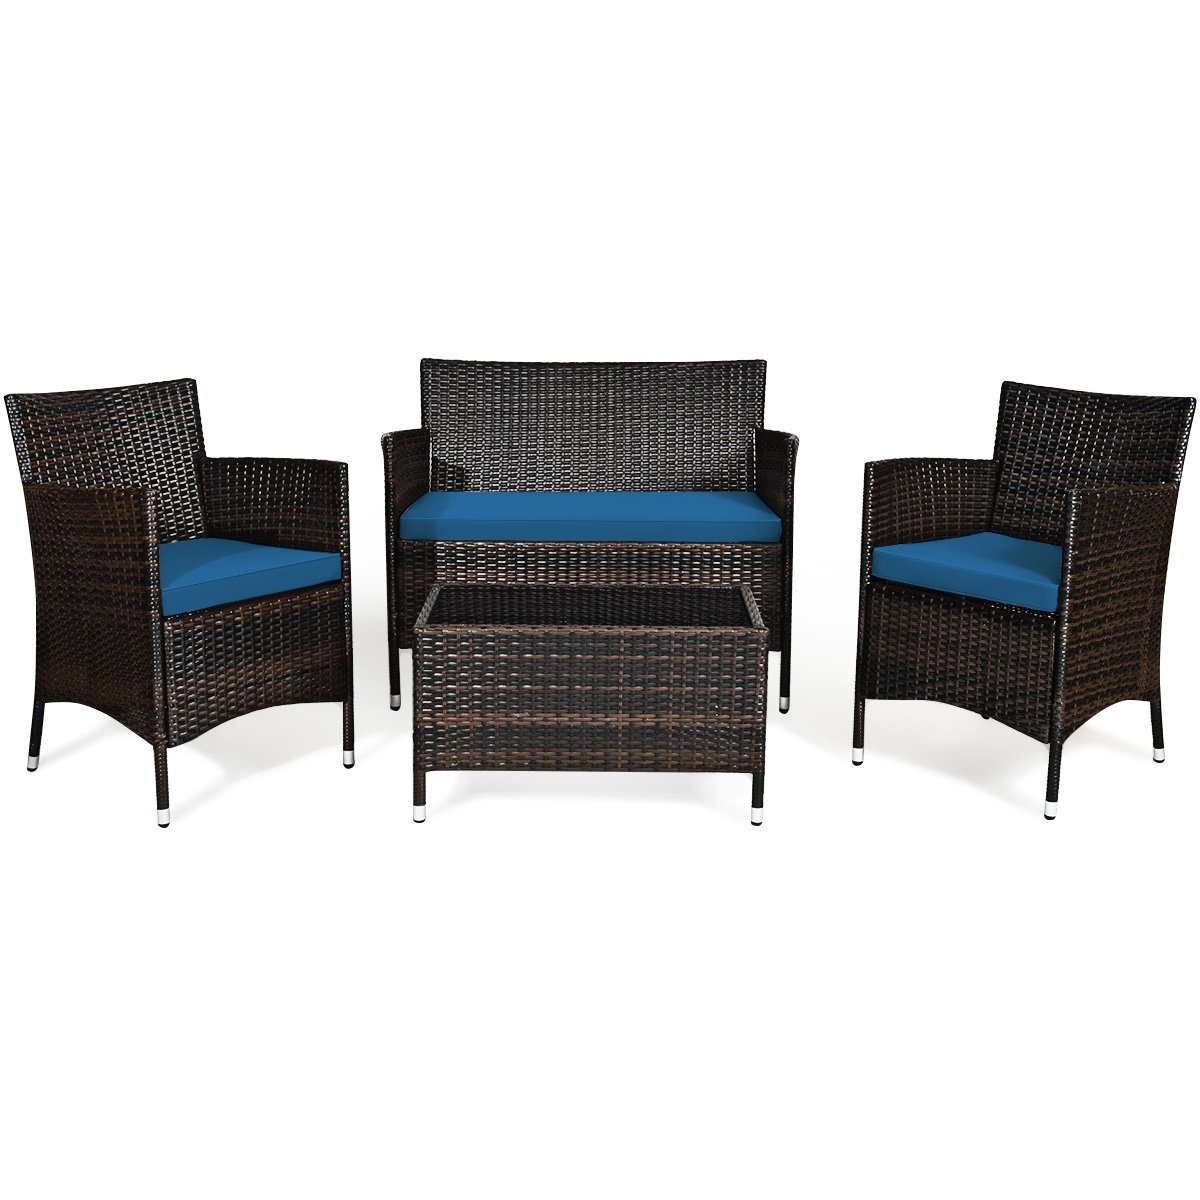 4 Pieces Comfortable Outdoor Rattan Sofa Set with Glass Coffee Table, Peacock Blue